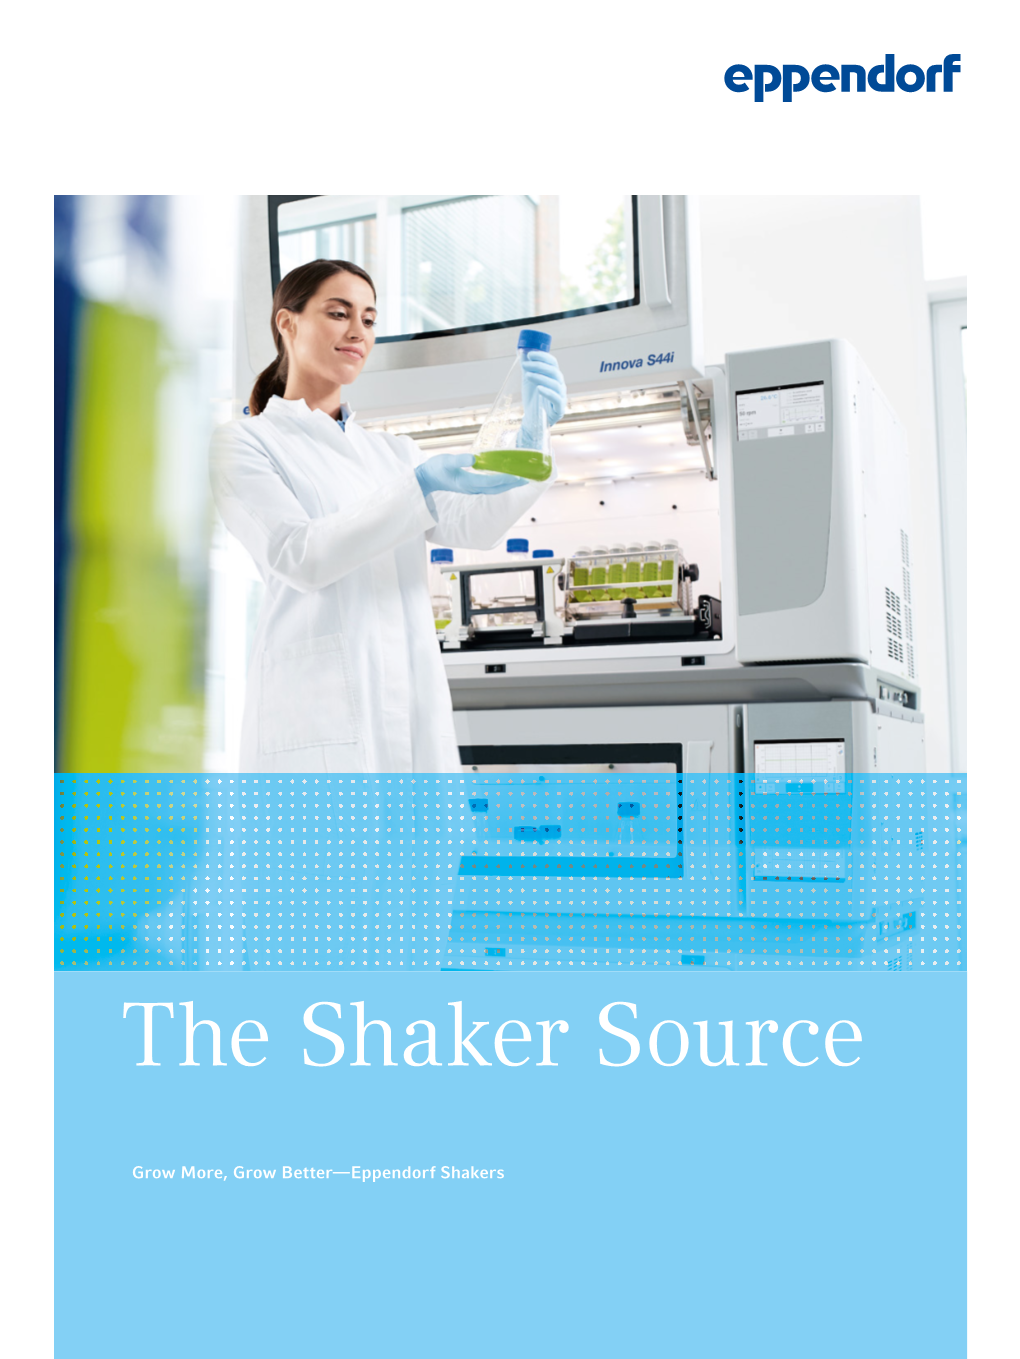 The Shaker Source